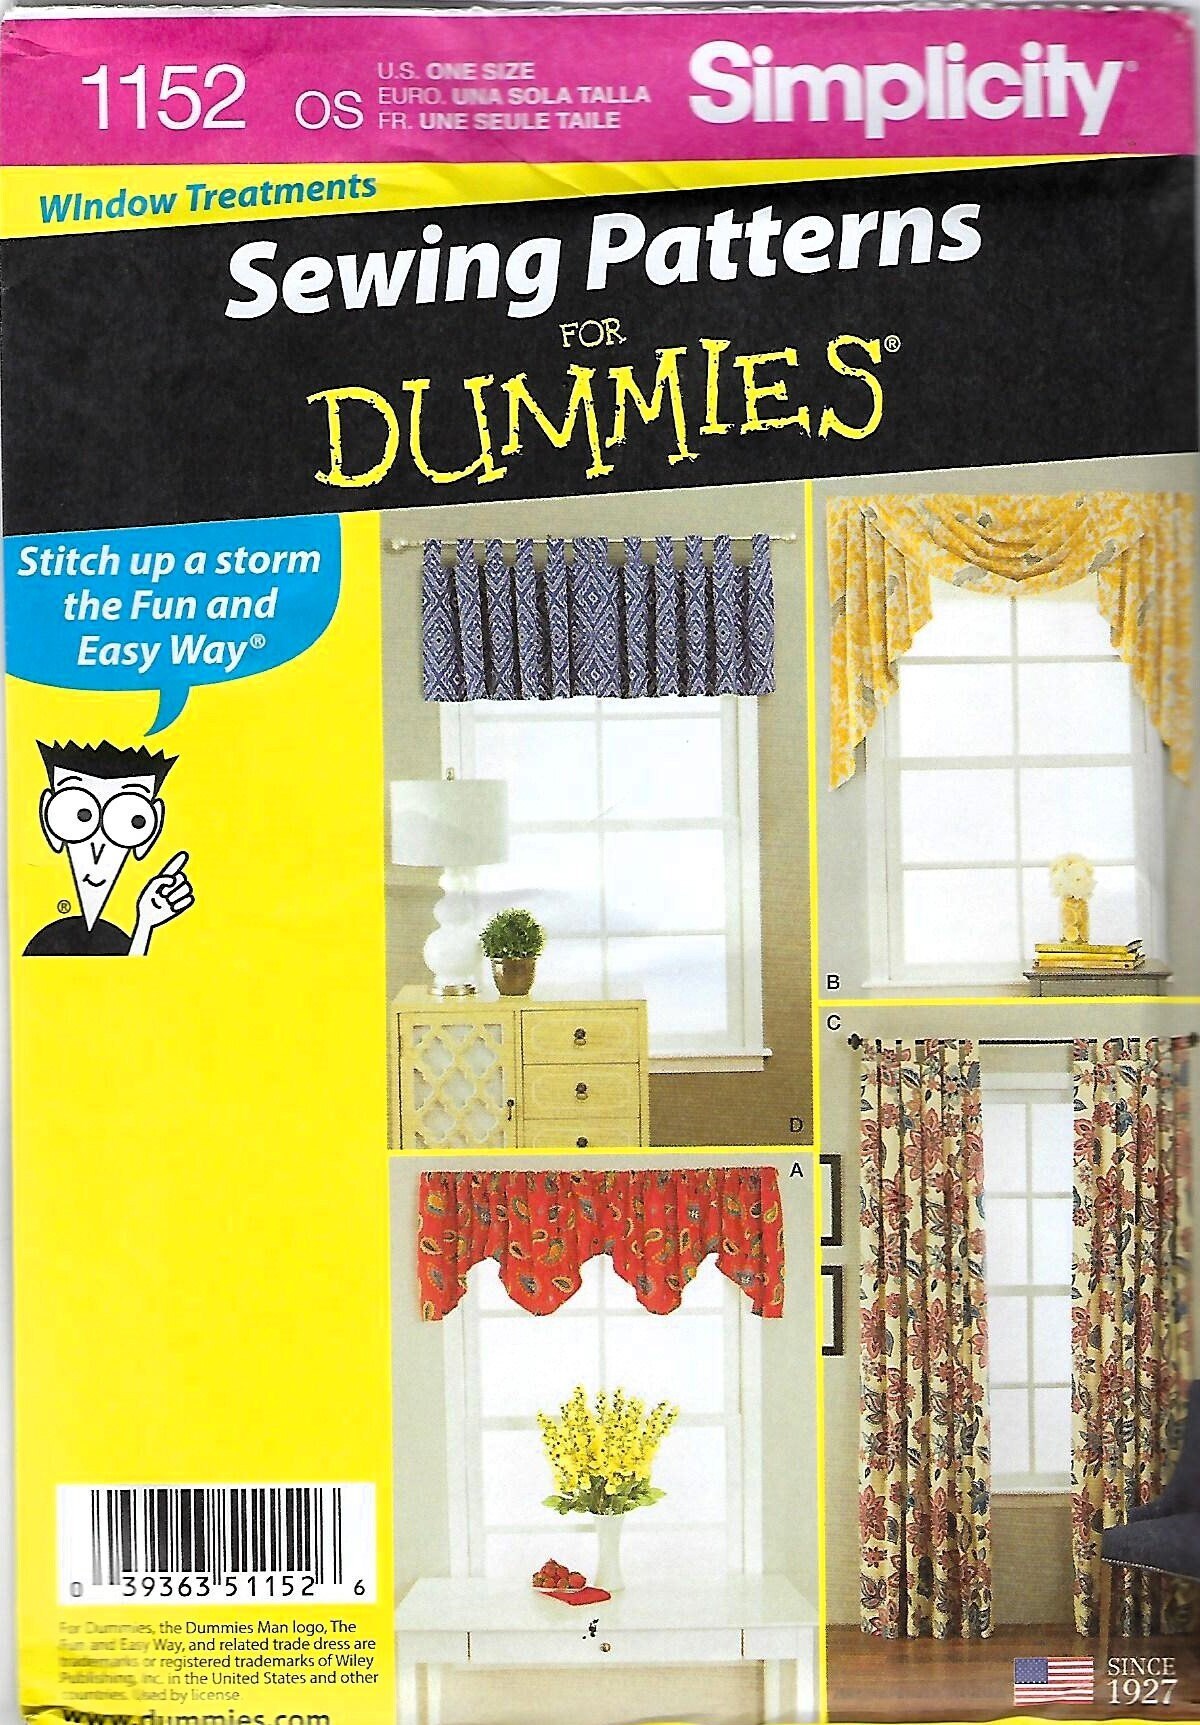  Simplicity 1152 Window Treatments Curtain Sewing Patterns for  Dummies, Short and Long Sizes : Arts, Crafts & Sewing